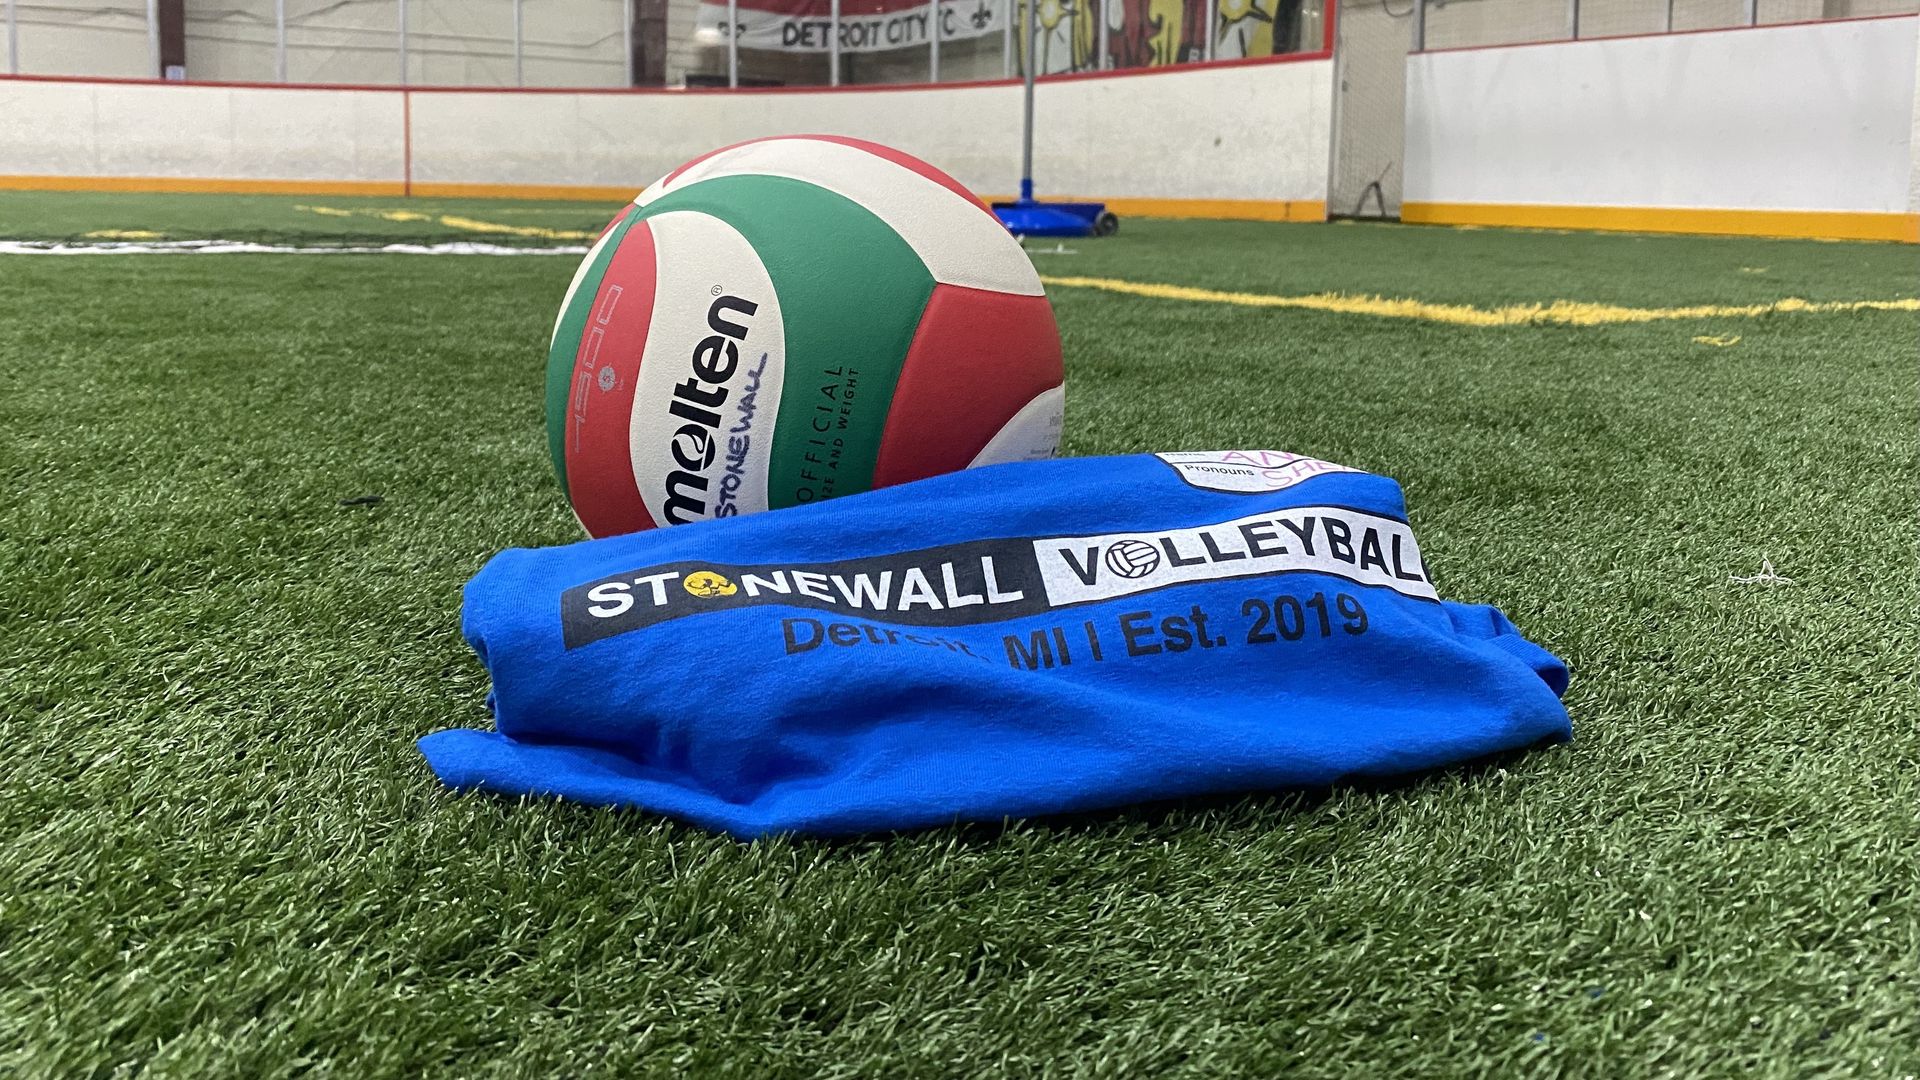 A volleyball sits next to a team t-shirt that says "Stonewall Volleyball" on a turf field.